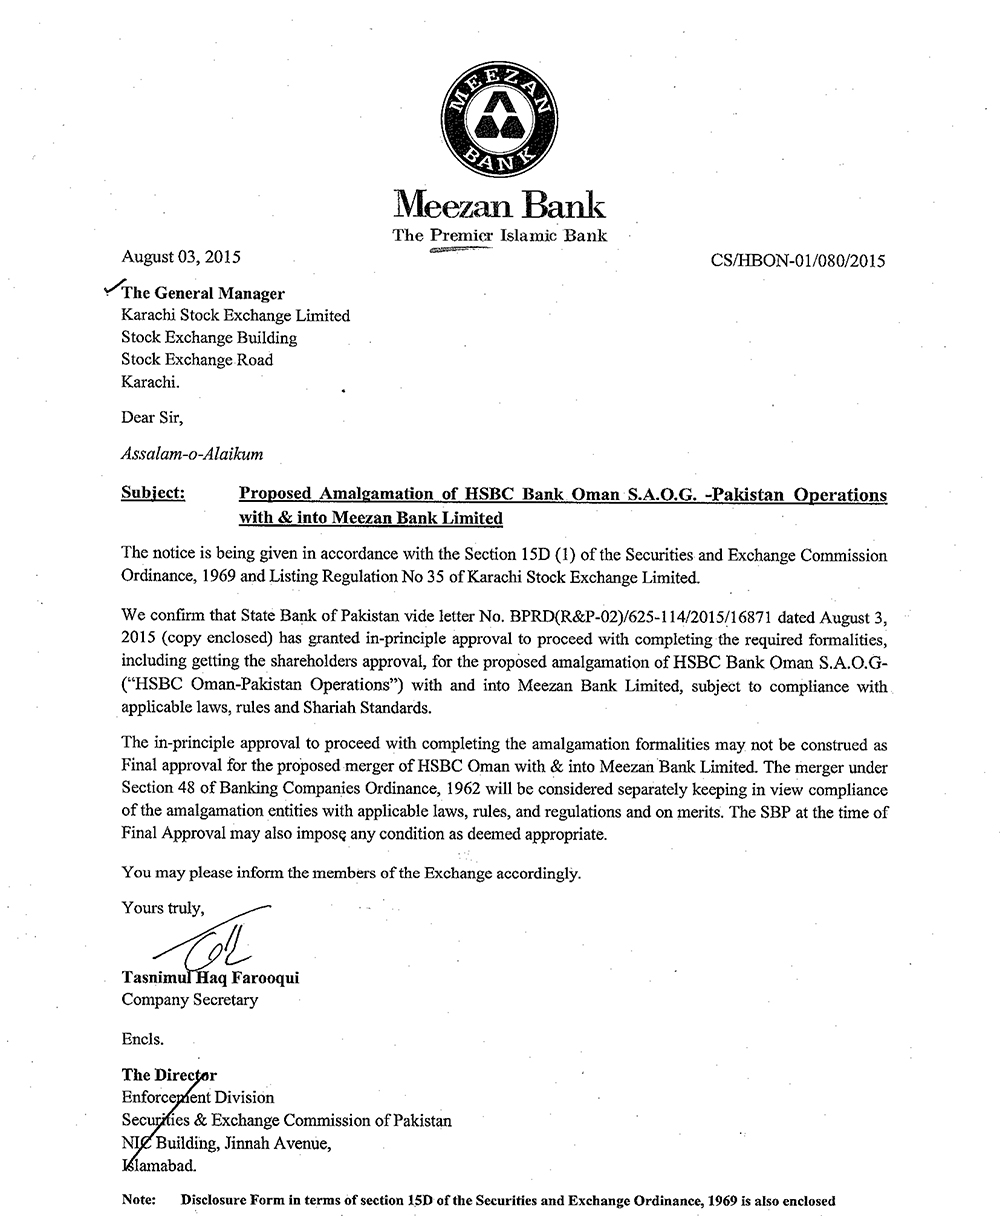 Proposed Amalgamation of HSBC Oman S.A.O.G-Pakistan Operation with and into Meezan Bank Limited 2015 (1)